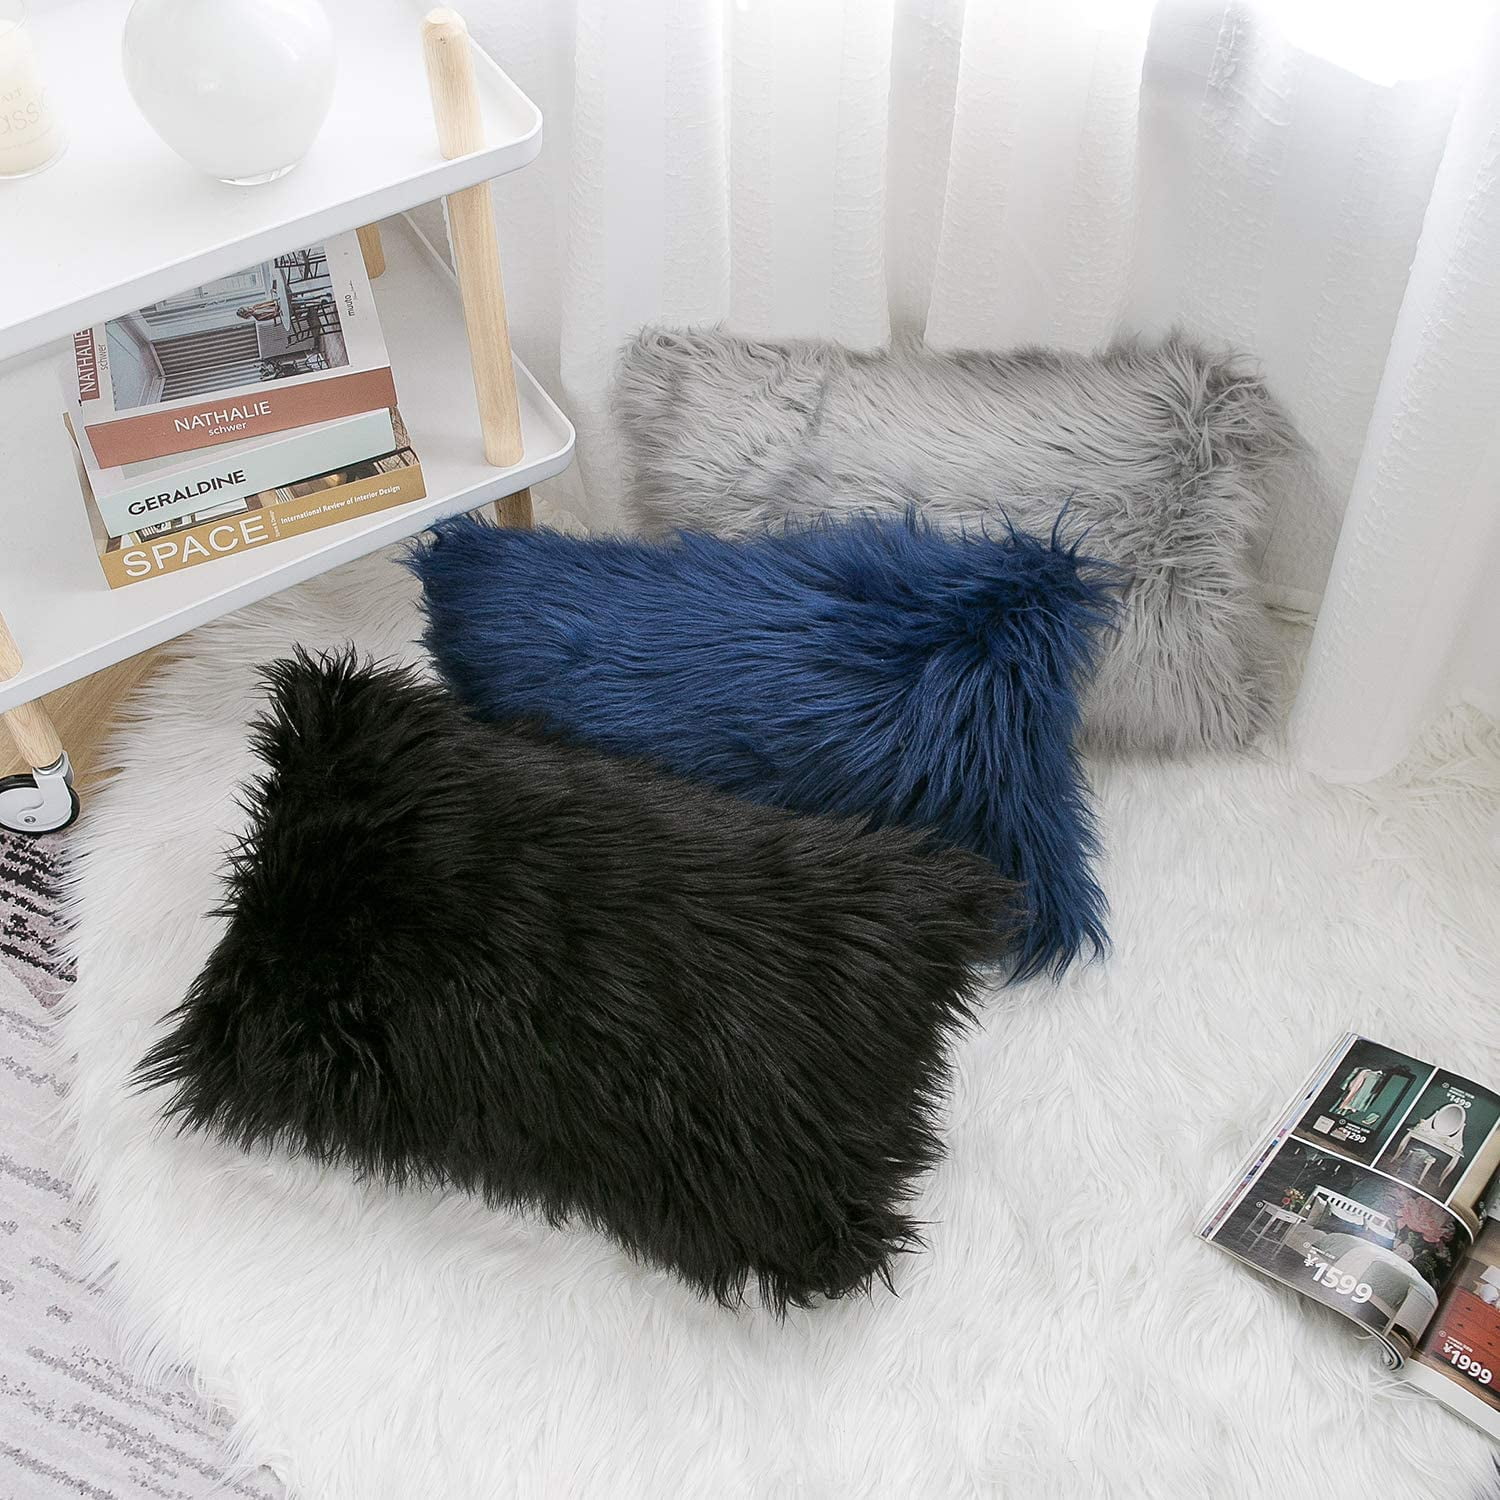 AerWo Set of 2 White Decorative Fluffy Pillow Covers, 20x20 Inch New Luxury  Series Merino Style Faux Fur Throw Pillow Covers Square Fuzzy Cushion